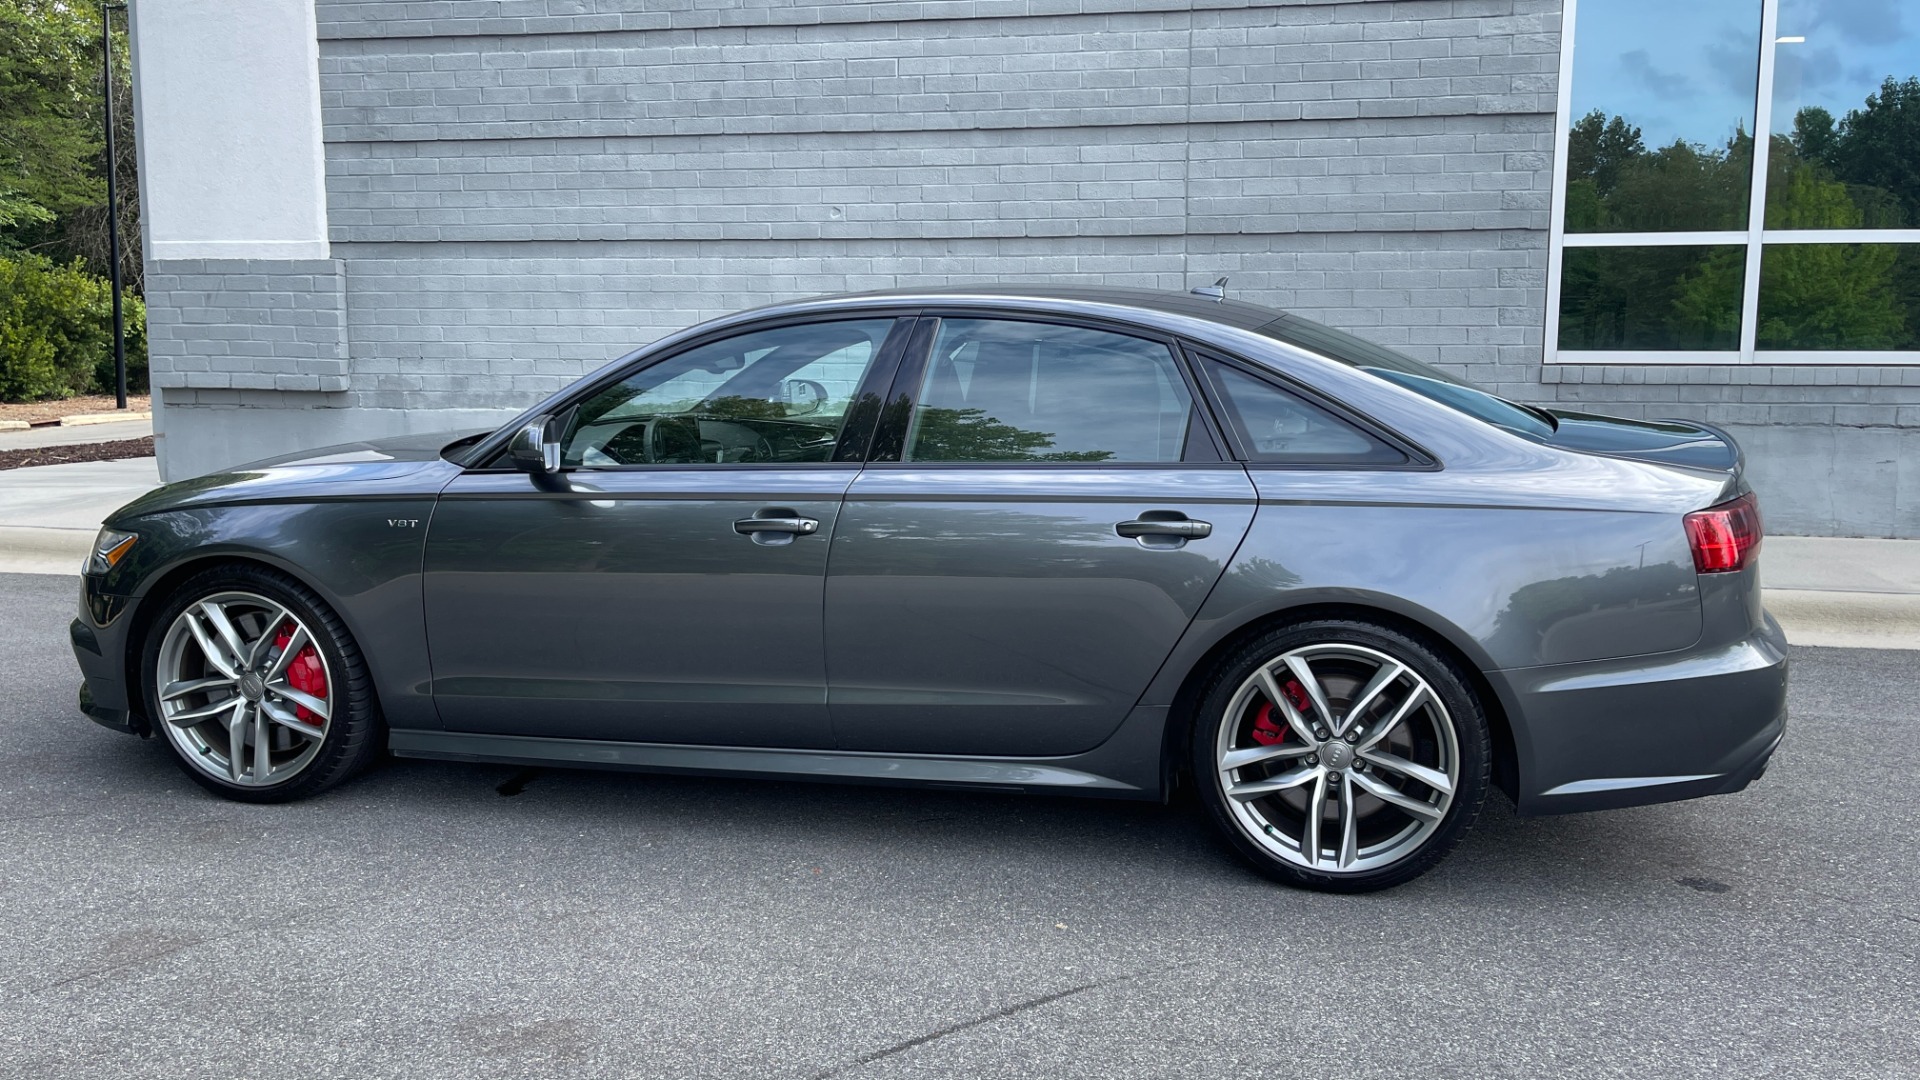 Used 2018 Audi S6 PRESTIGE / S SPORT / BLACK OPTIC / 4.0L V8 TURBO / COLD WEATHER PACKAGE for sale Sold at Formula Imports in Charlotte NC 28227 5